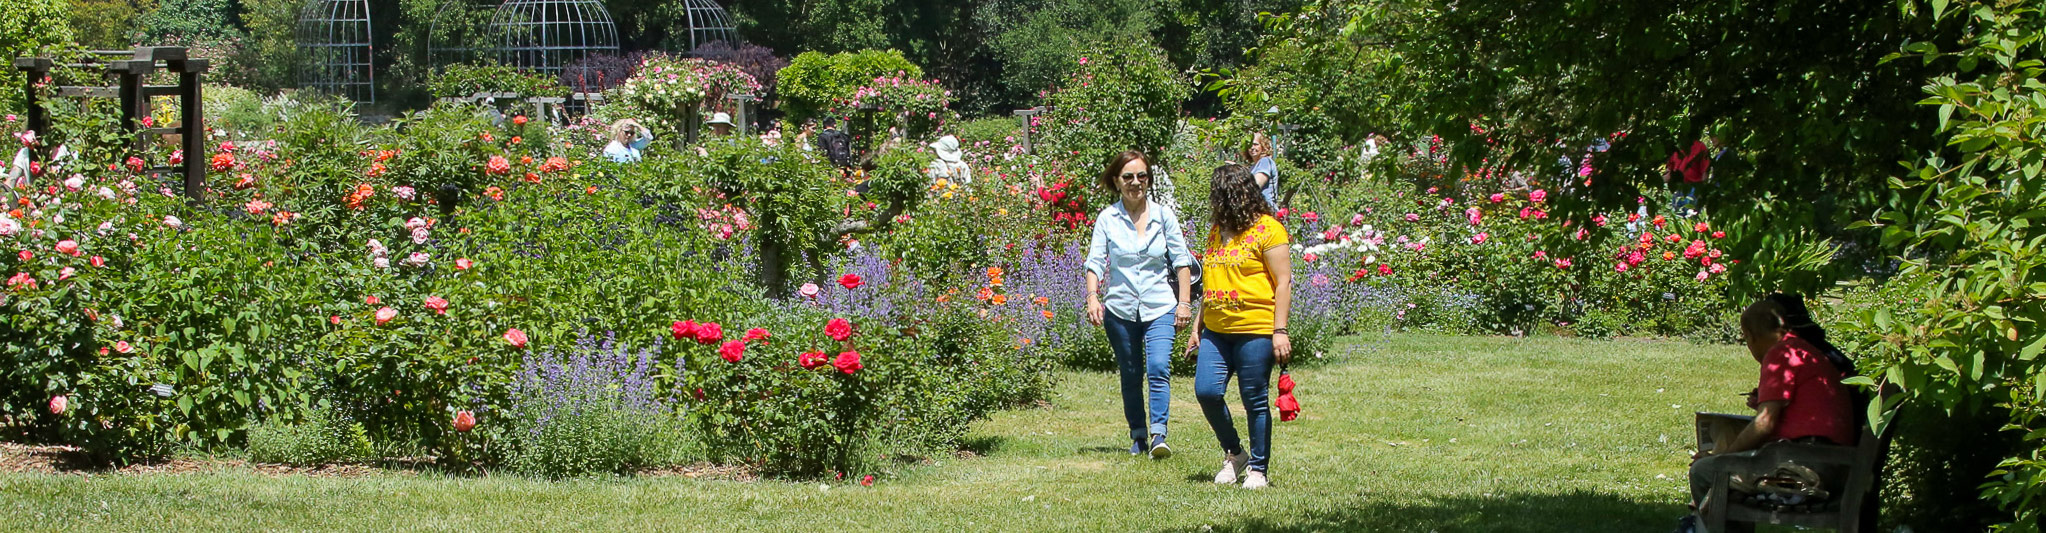 Here's the client giving a tour of the Garden. Check out our garden ma